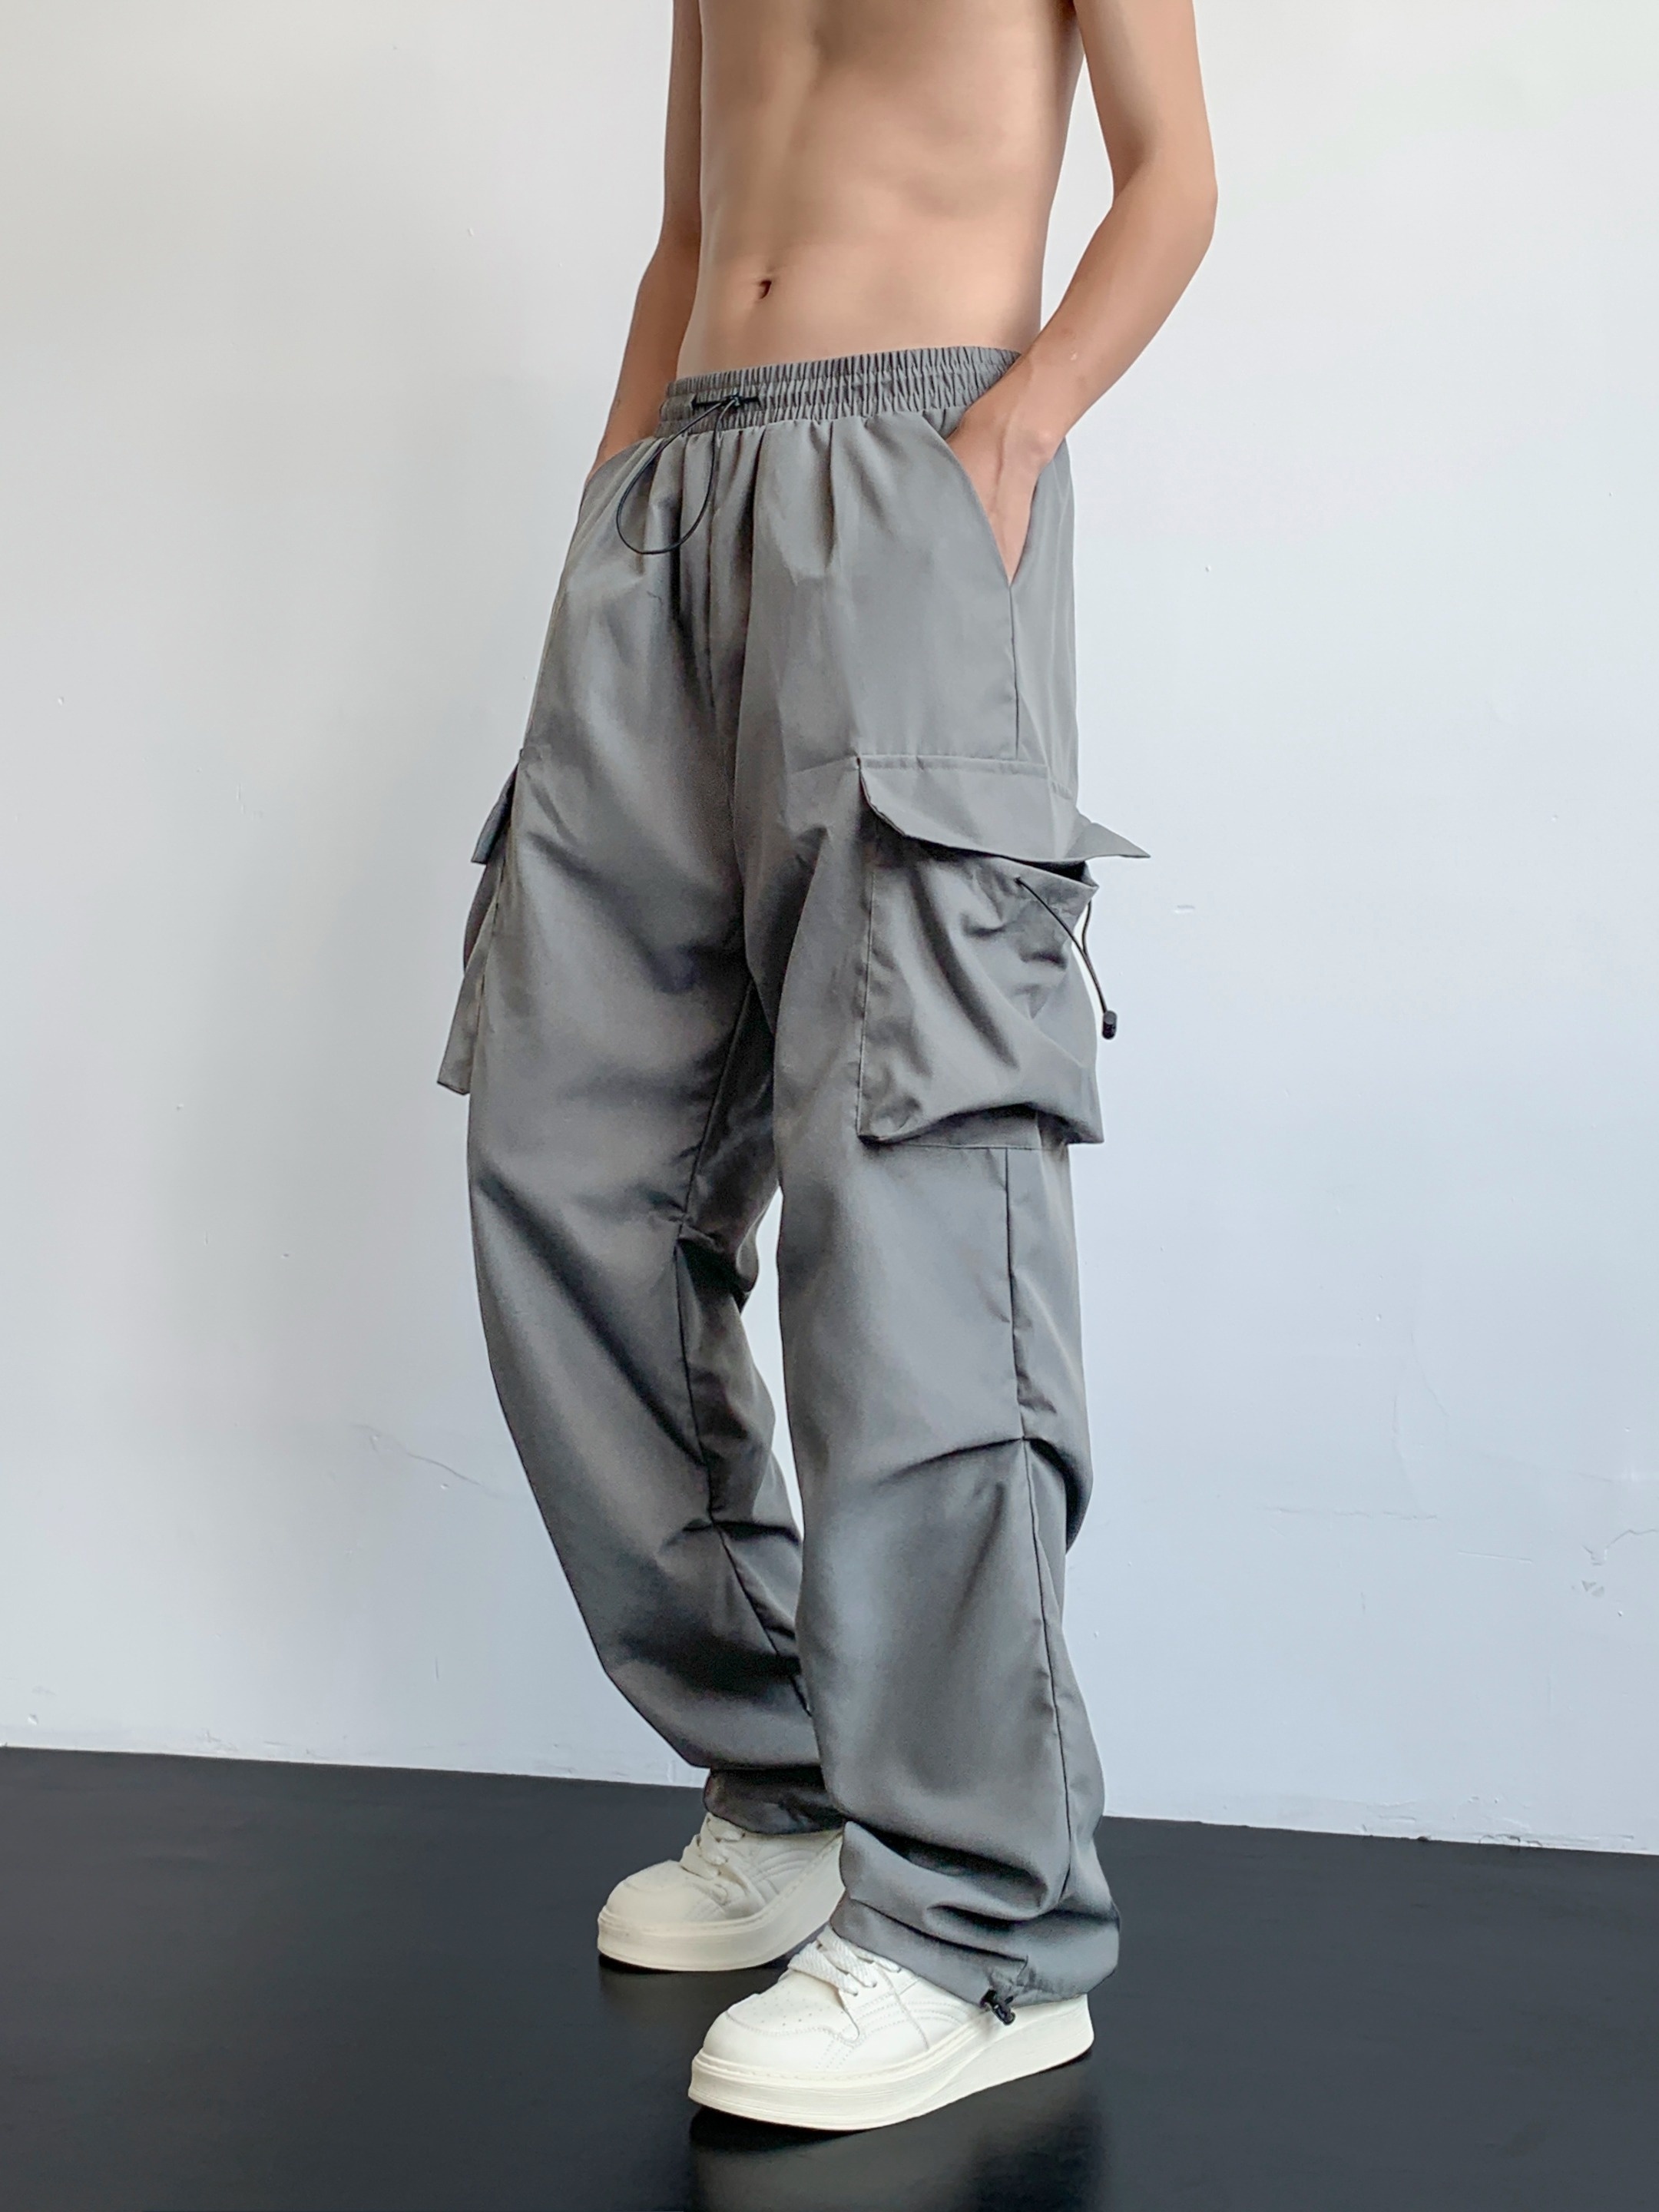 Relaxed Fit Cargo Pants - Light gray - Men